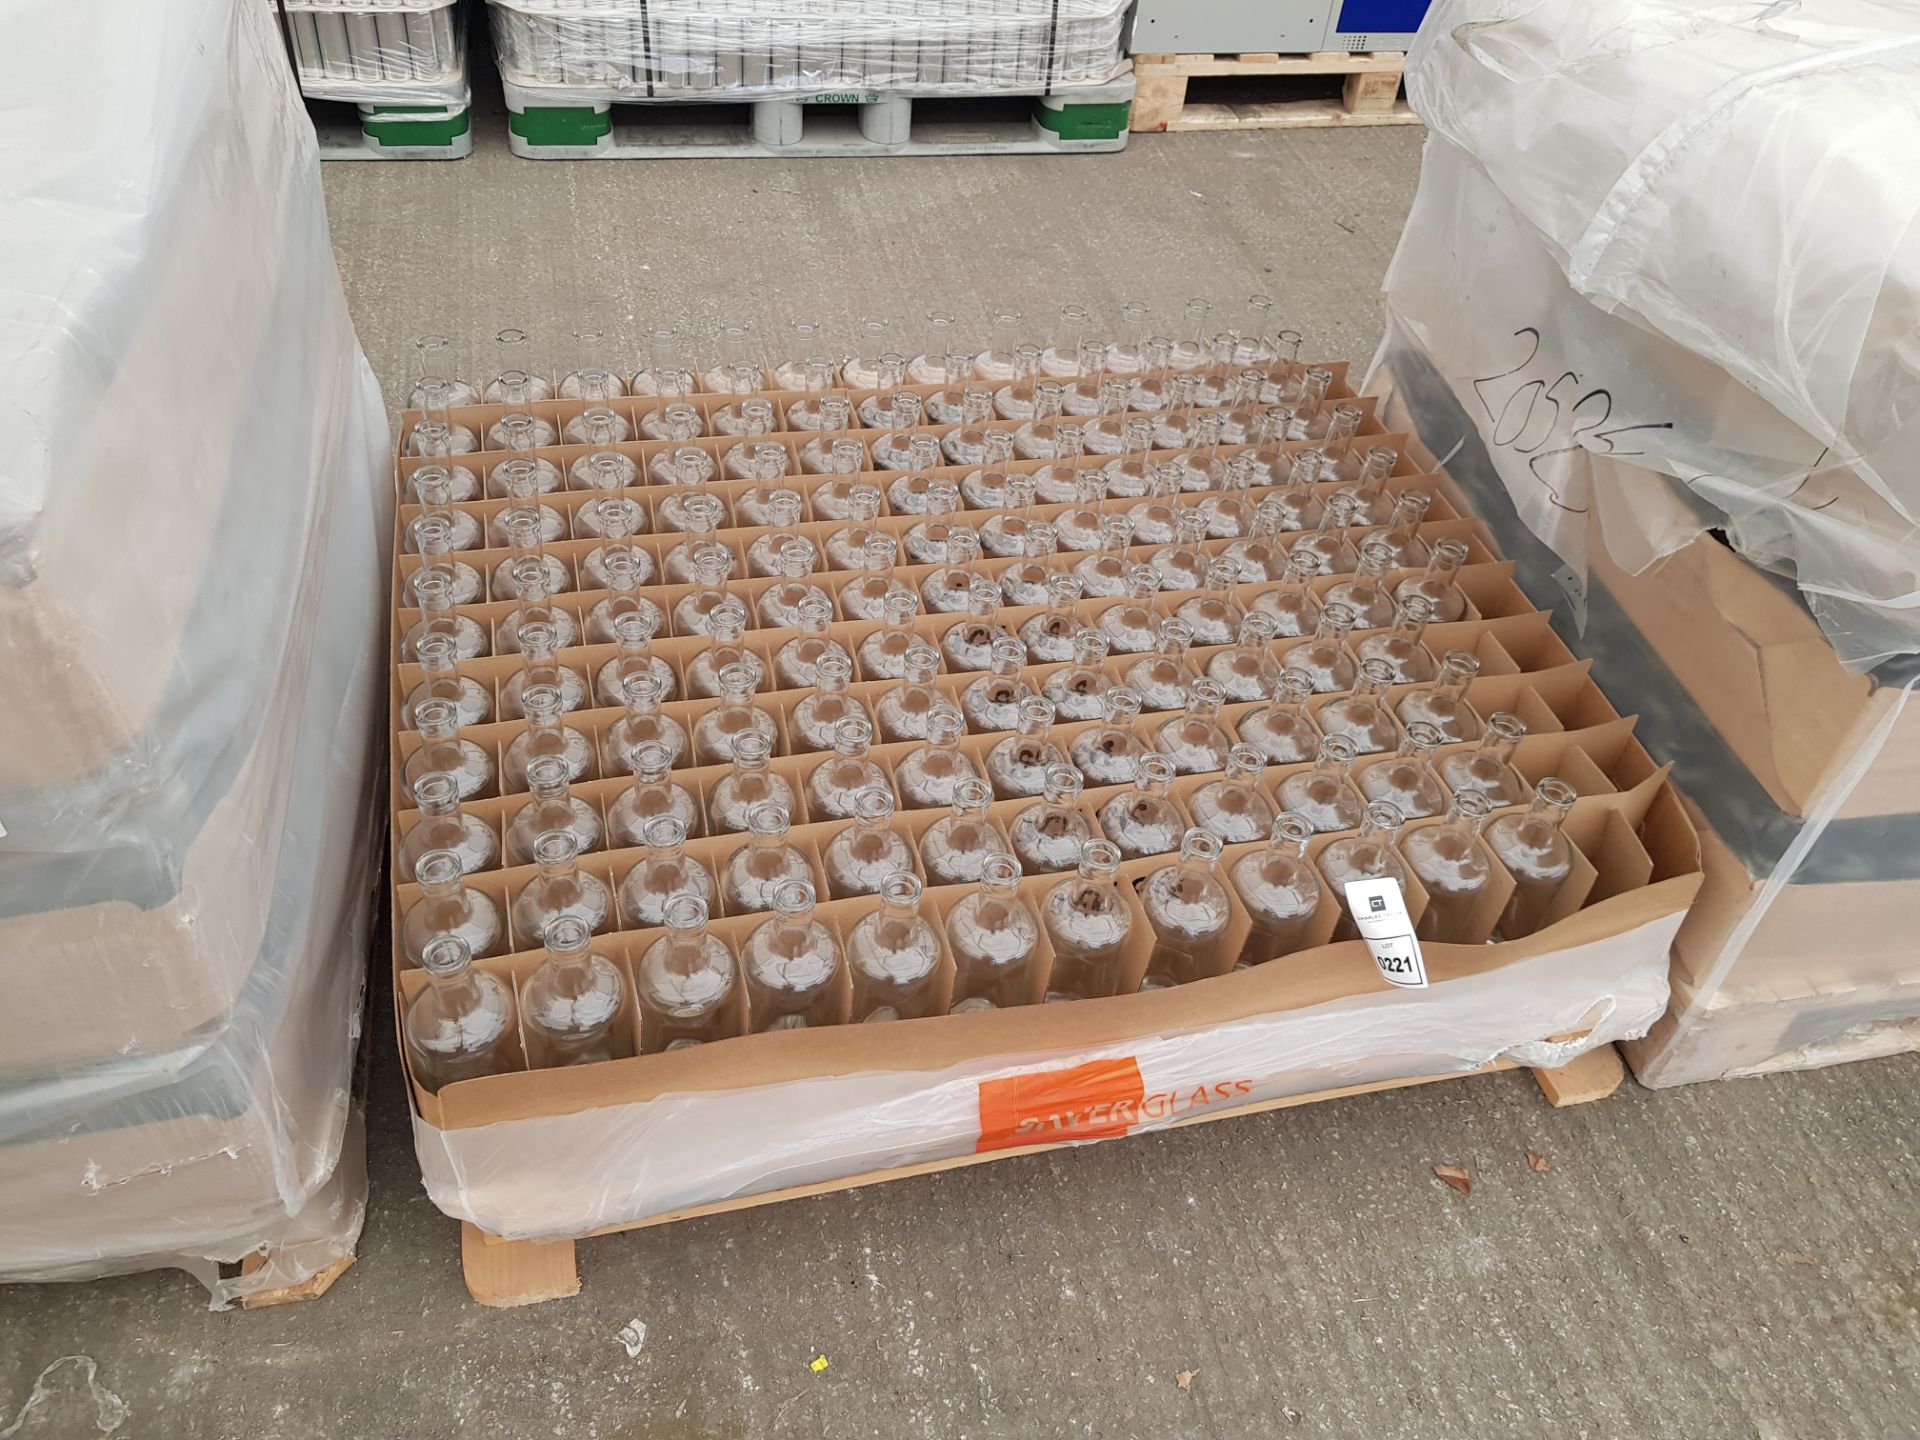 139 X BRAND NEW SAVER GLASS OXYGEN 75CL GLASS BOTTLES CORK TOP (HEIGHT 26CM) ON 1 PALLET. - Image 2 of 2